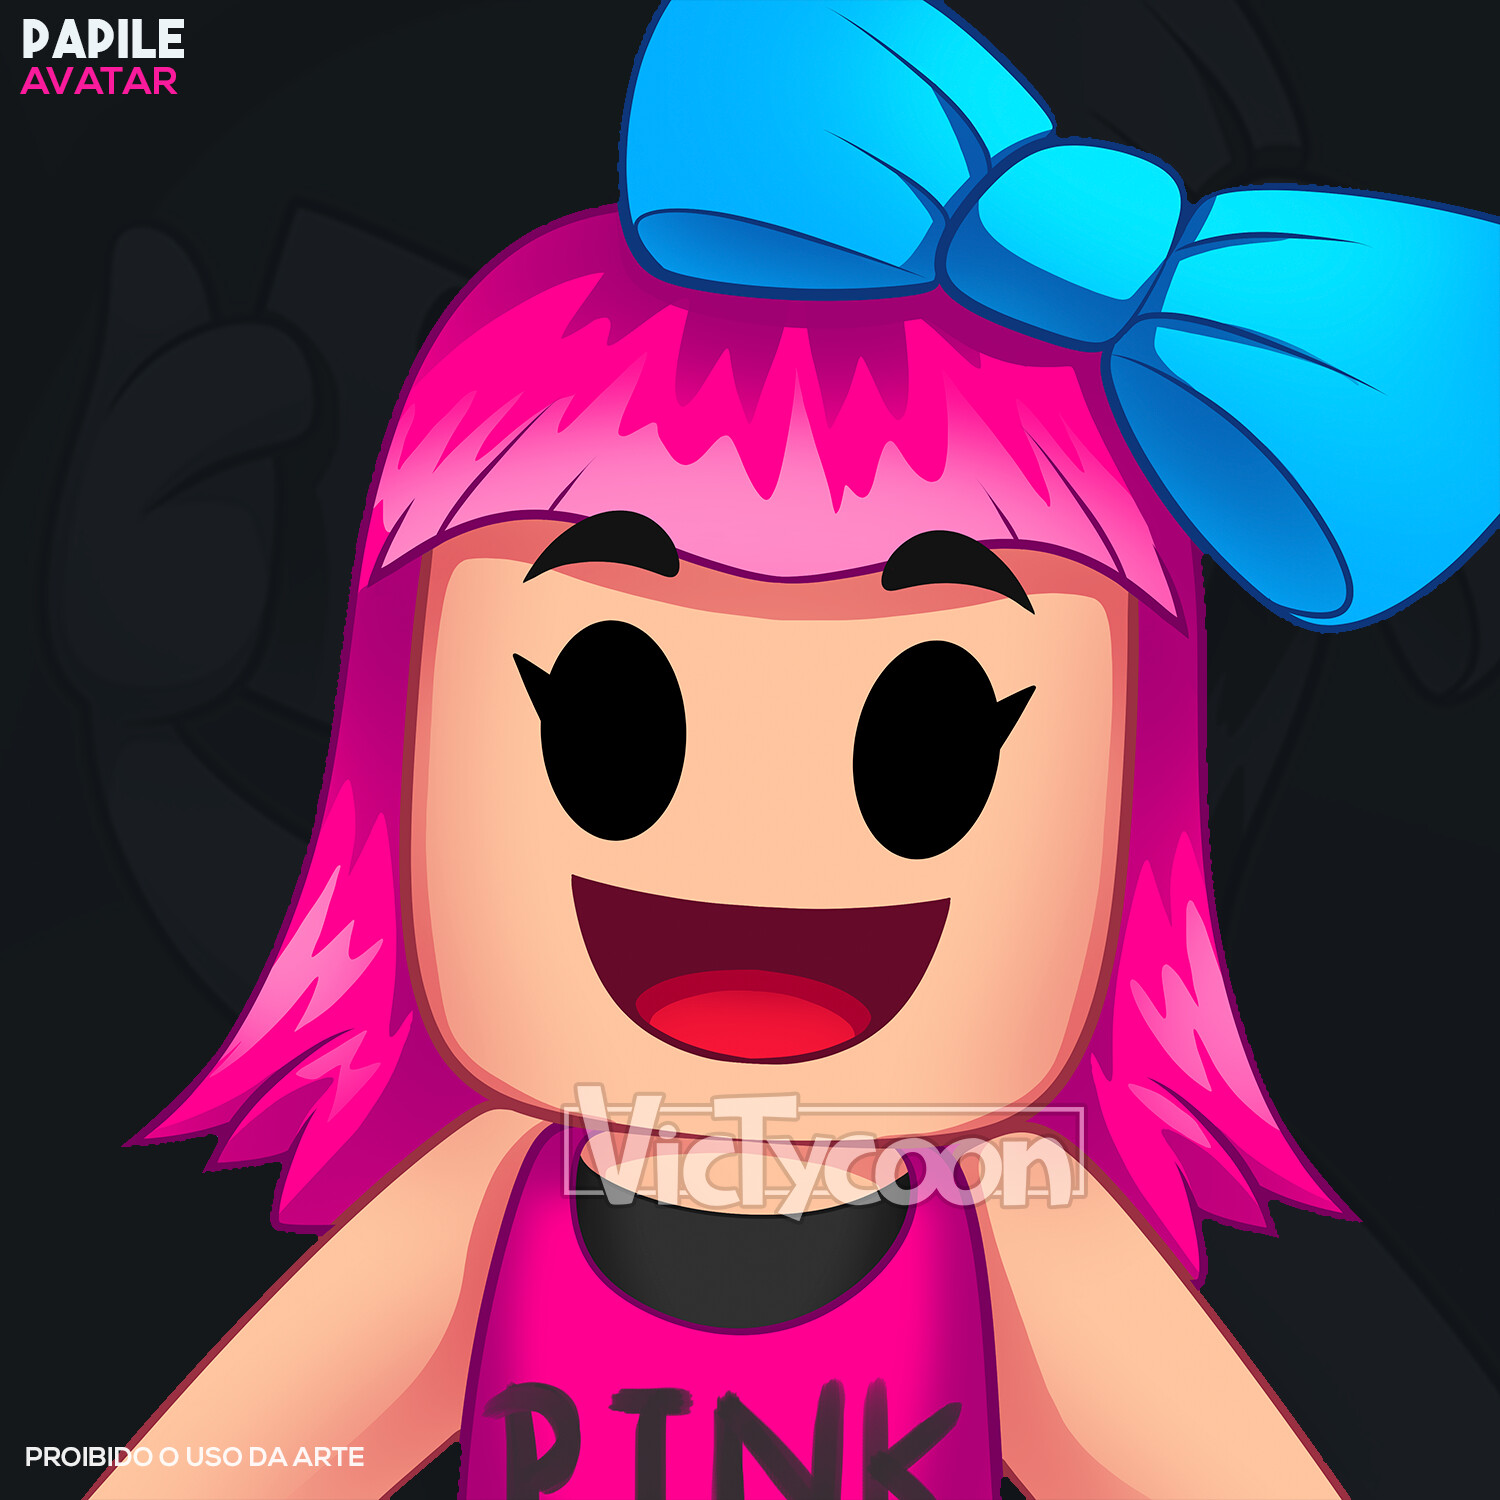 Perfil - Roblox  Roblox animation, Free avatars, Roblox pictures